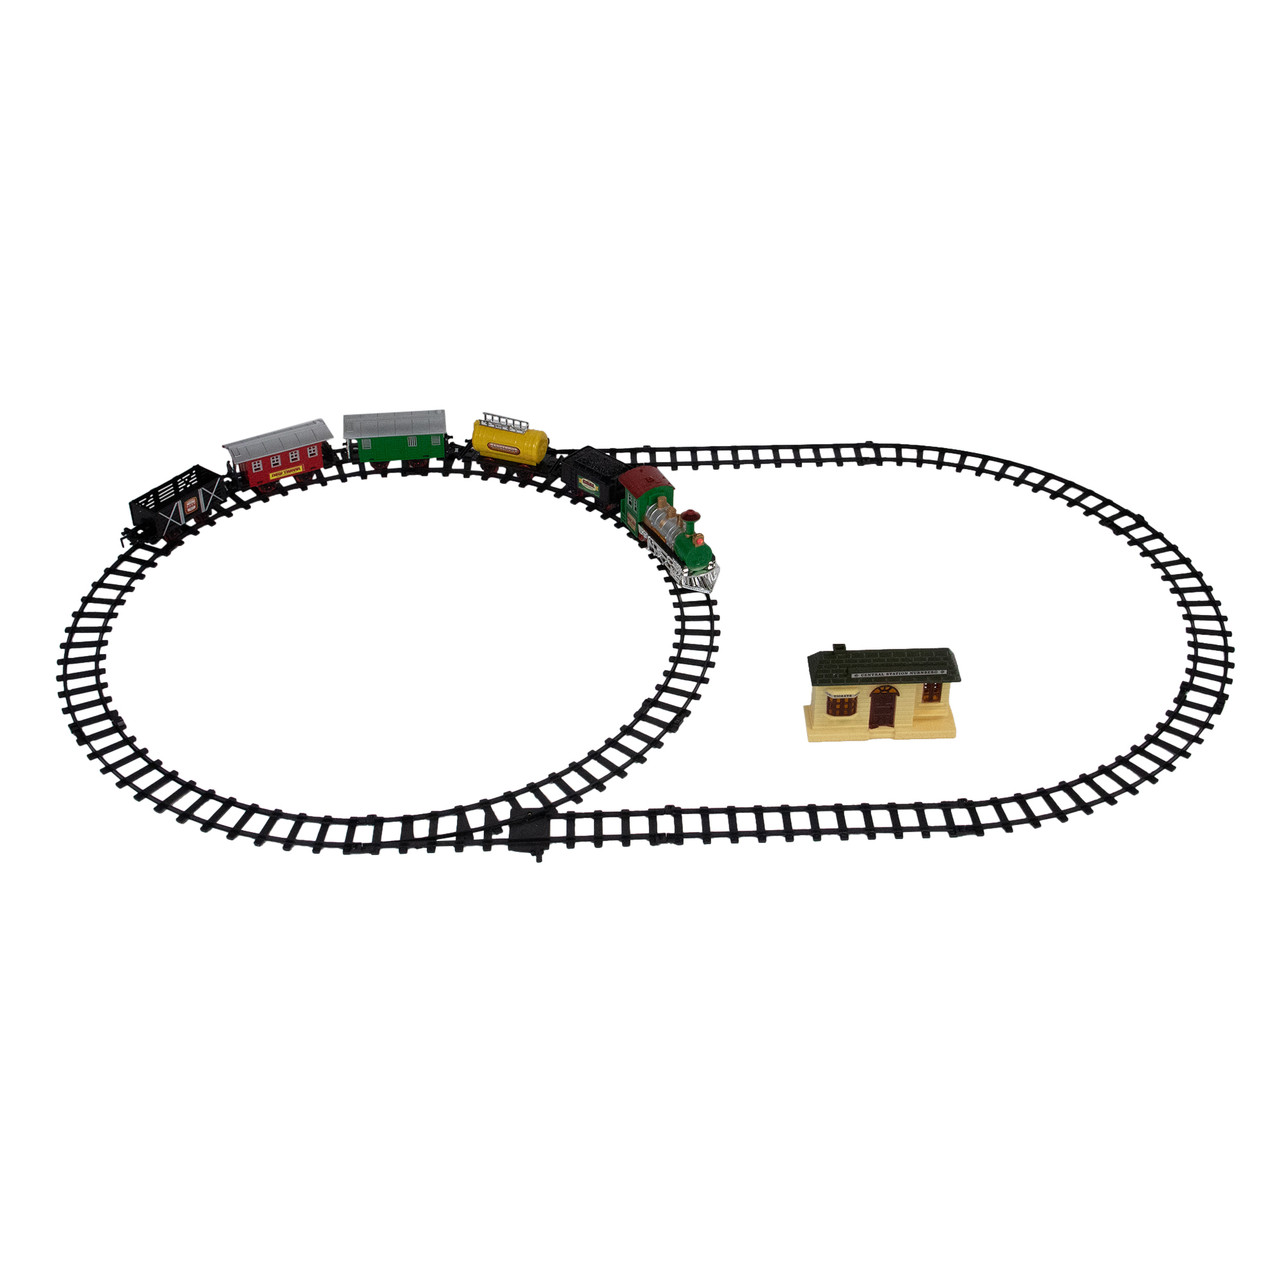 18-Piece Black & Green Battery Operated Animated Classic Model Train ...